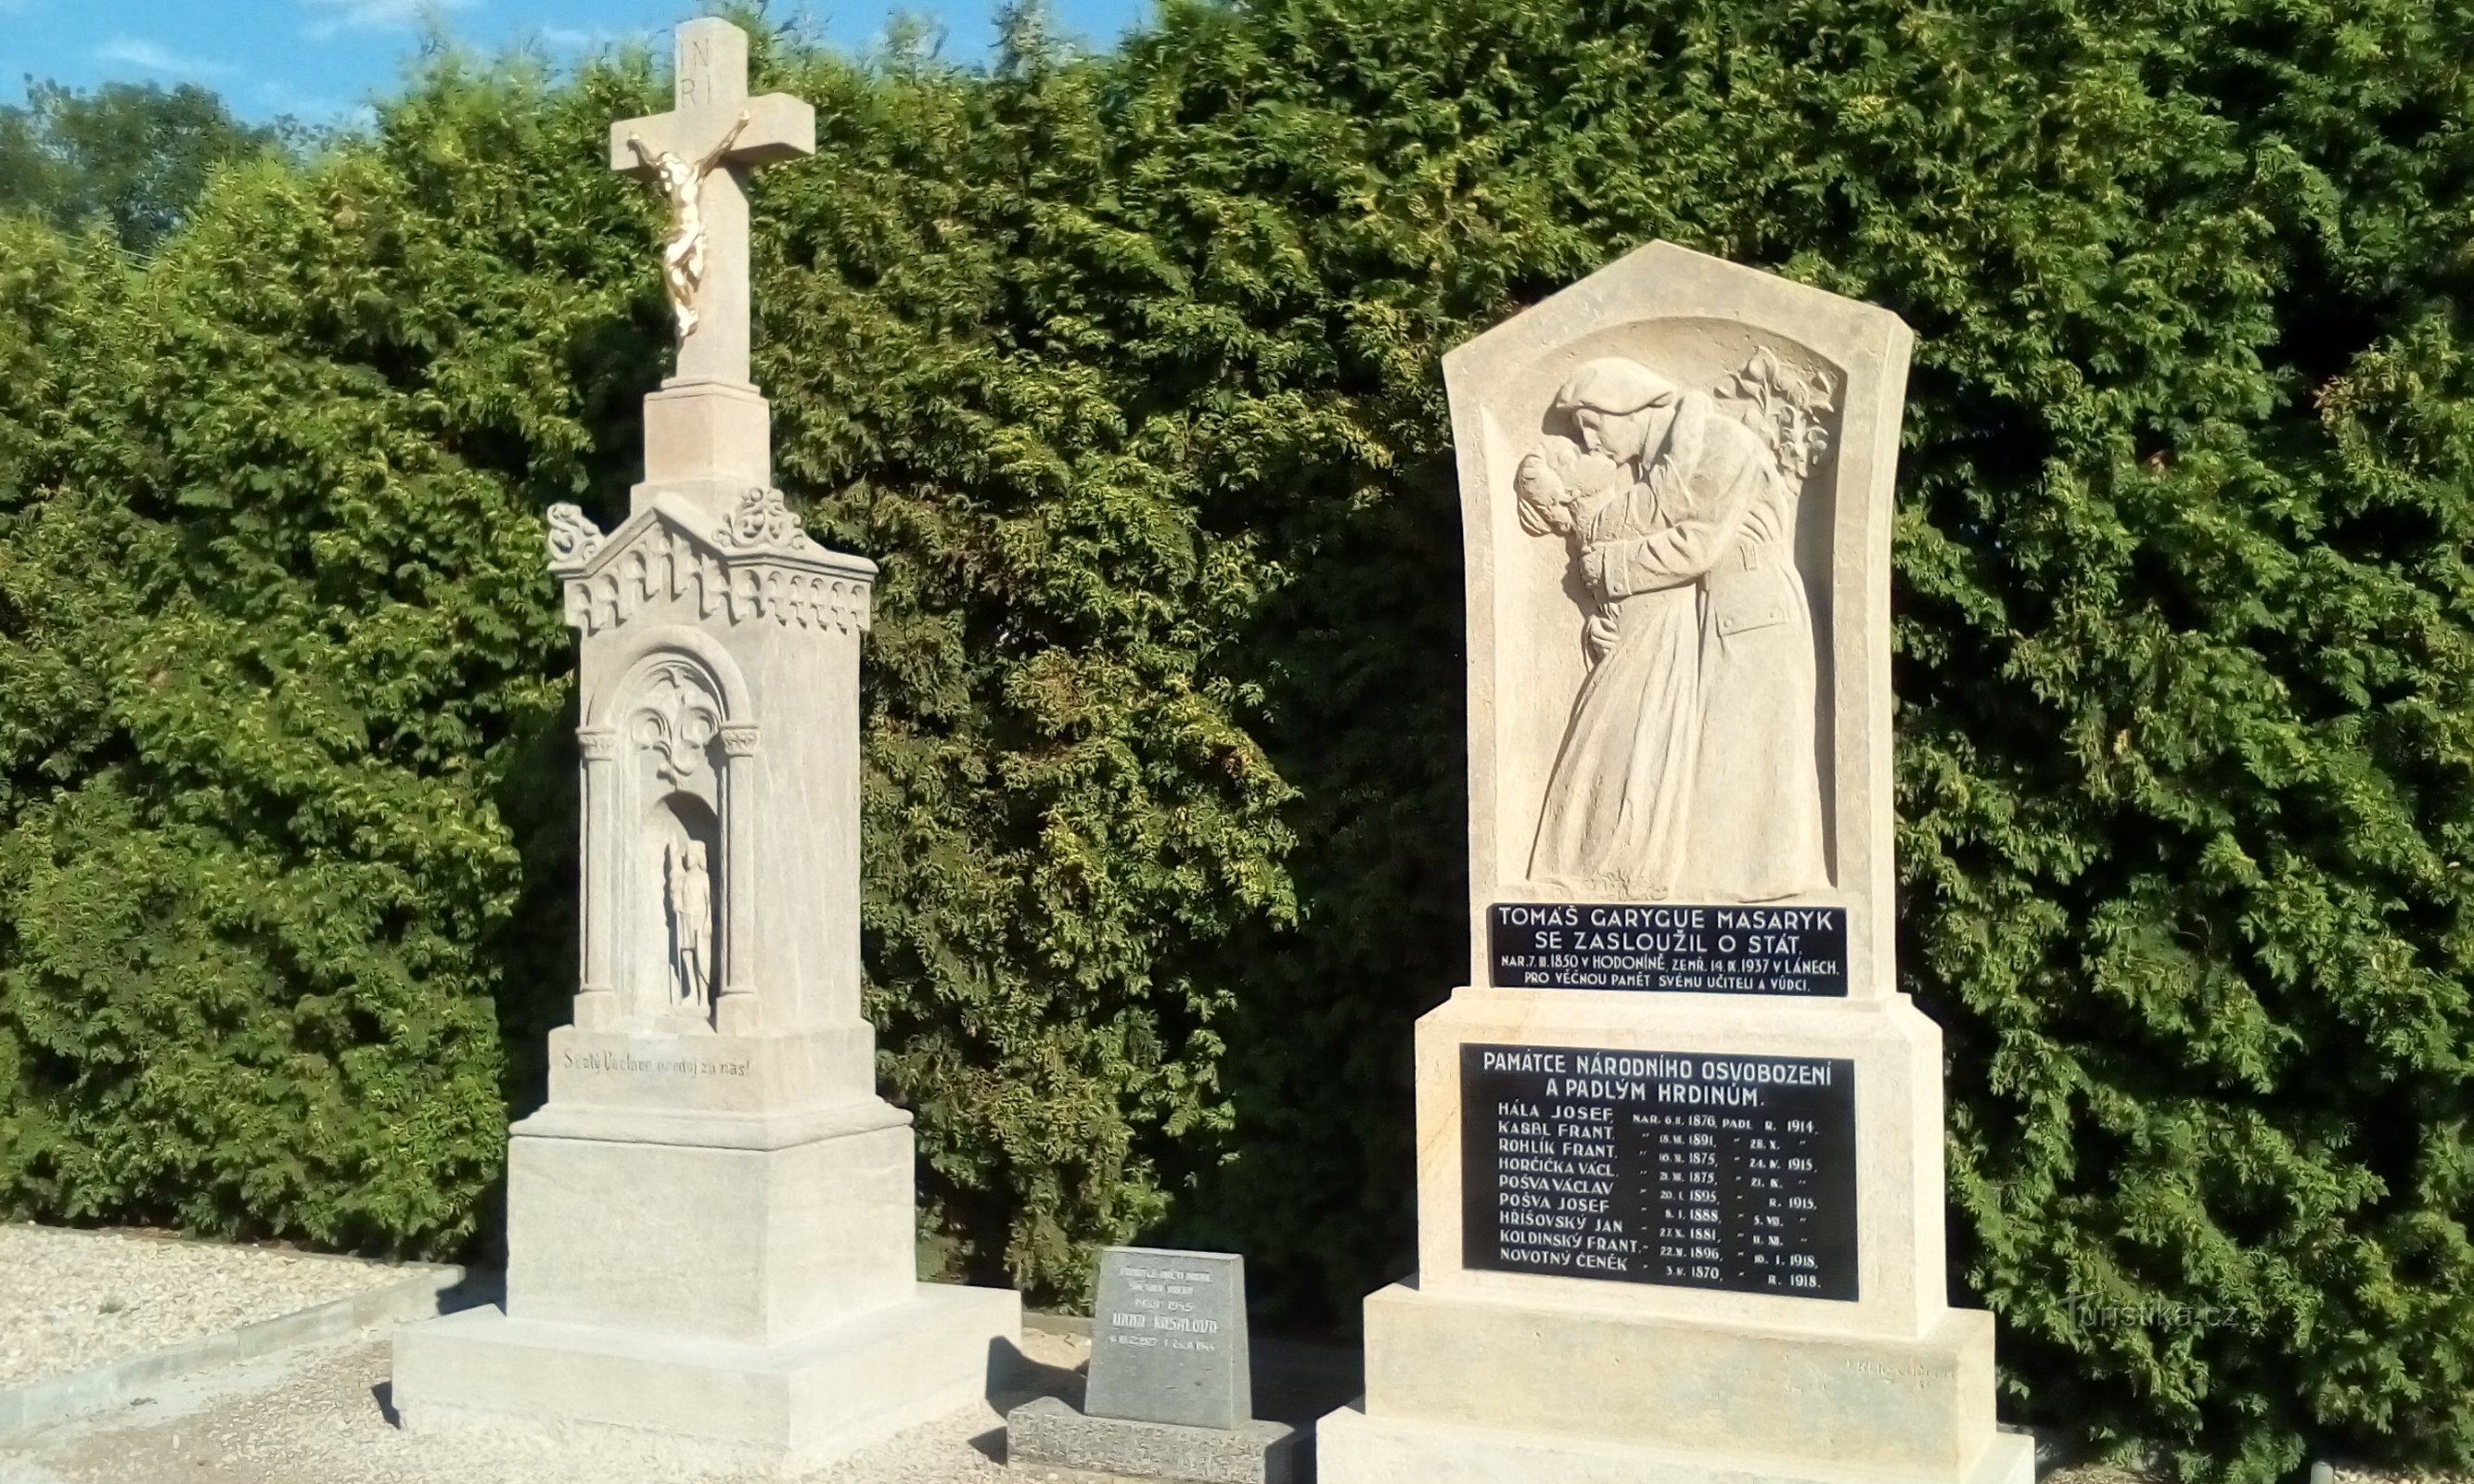 Monument to the victims of the First World War in Srnojedy